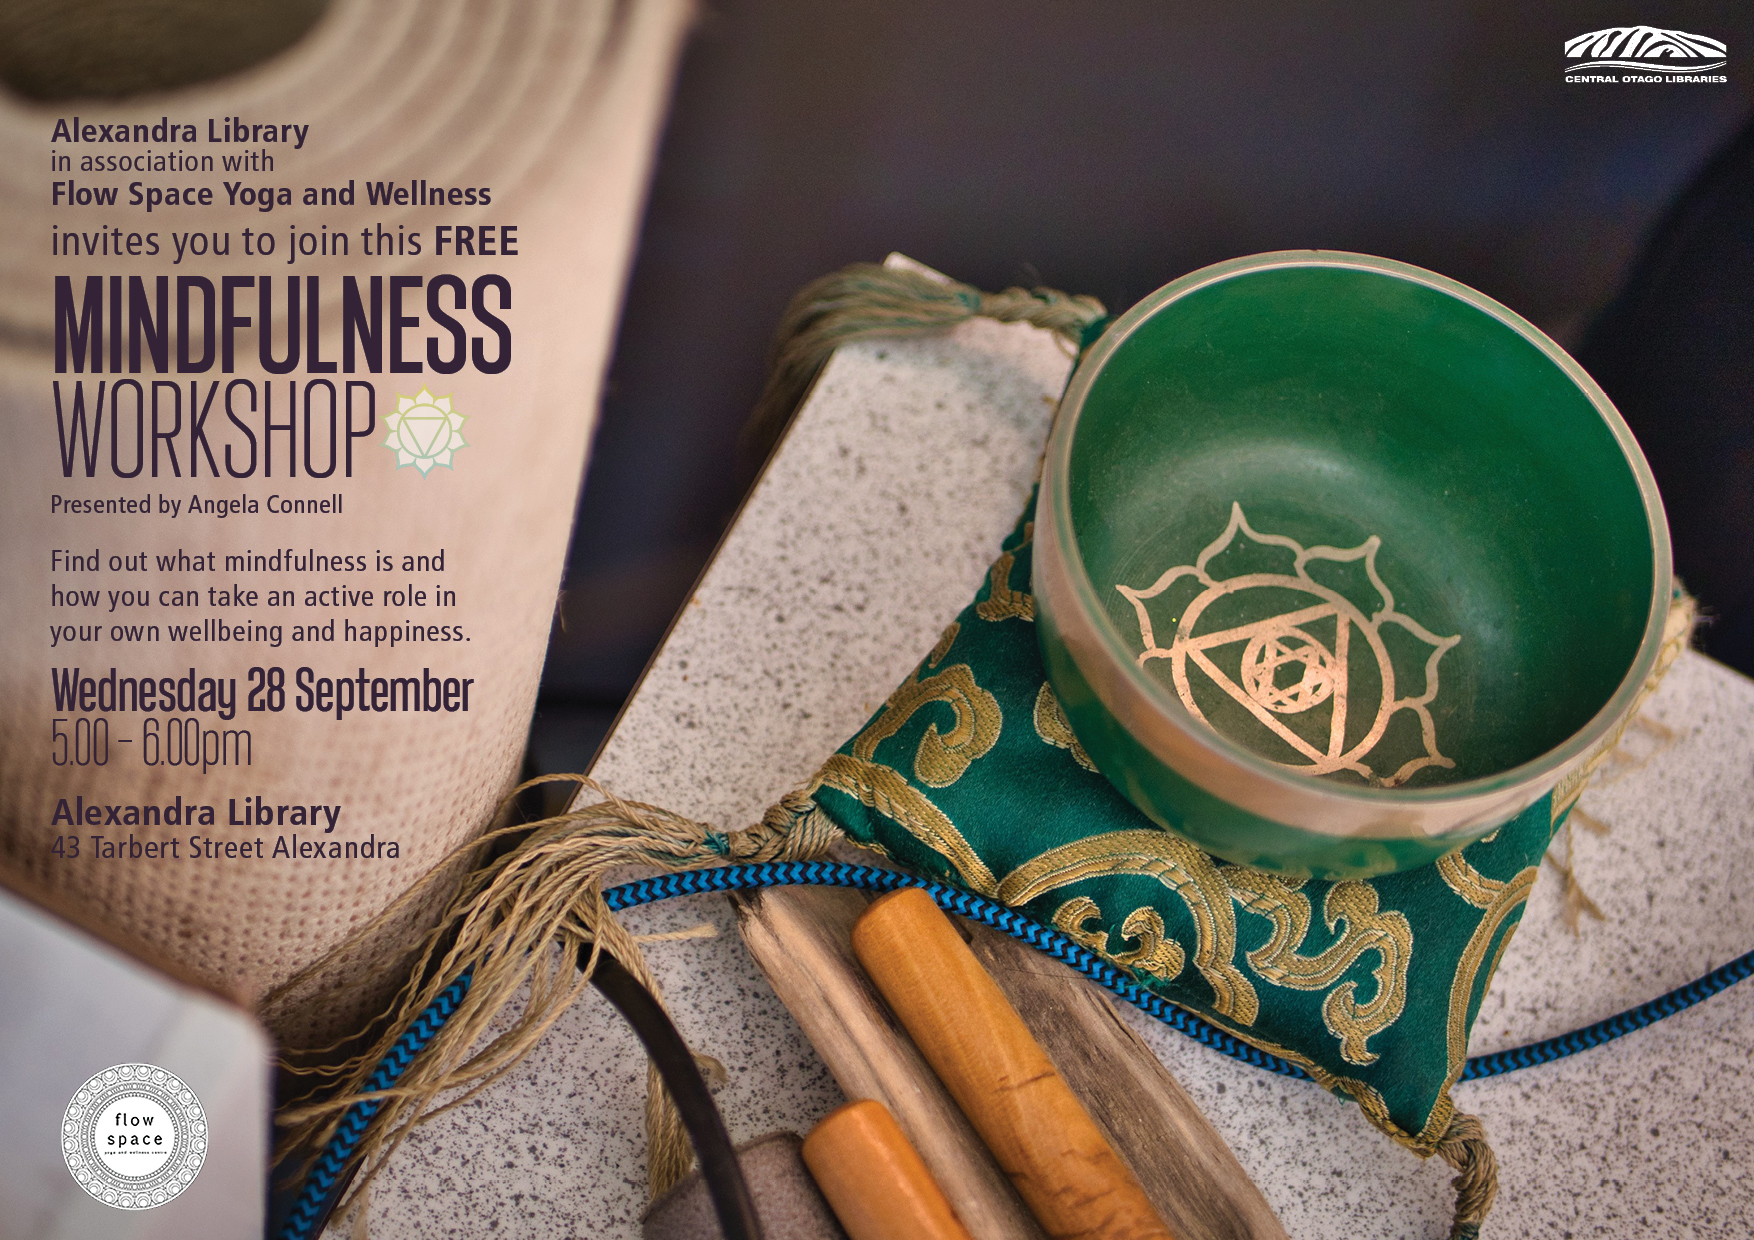 An exercise in mindfulness and wellness at the Alexandra Library on Wednesday 28 September.